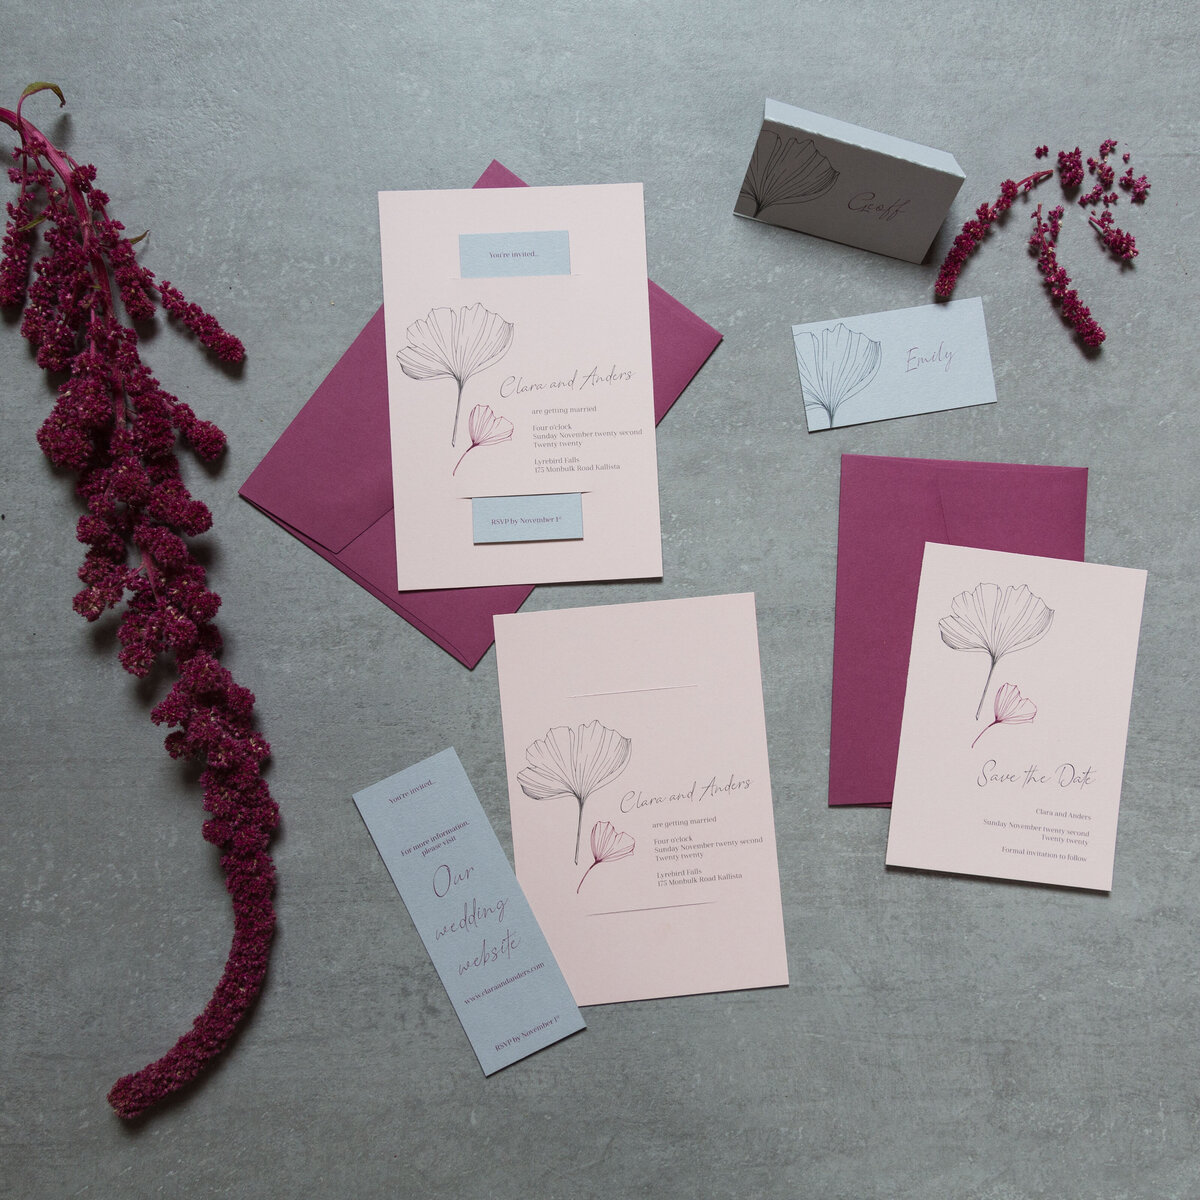 Pink and purple and grey wedding invitation suite with ginkgo leaf design and matching place card and save the date cards